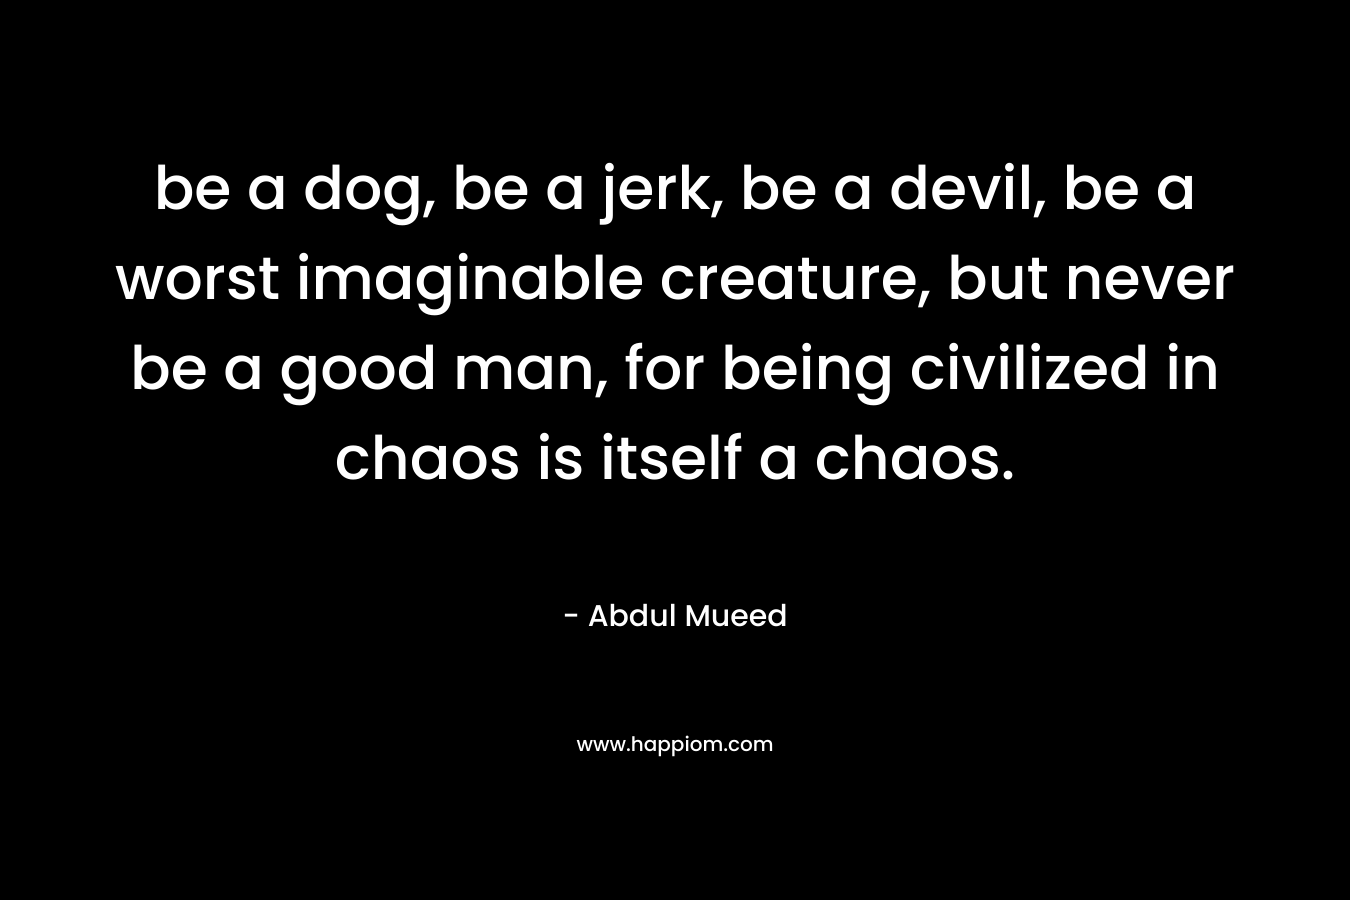 be a dog, be a jerk, be a devil, be a worst imaginable creature, but never be a good man, for being civilized in chaos is itself a chaos.